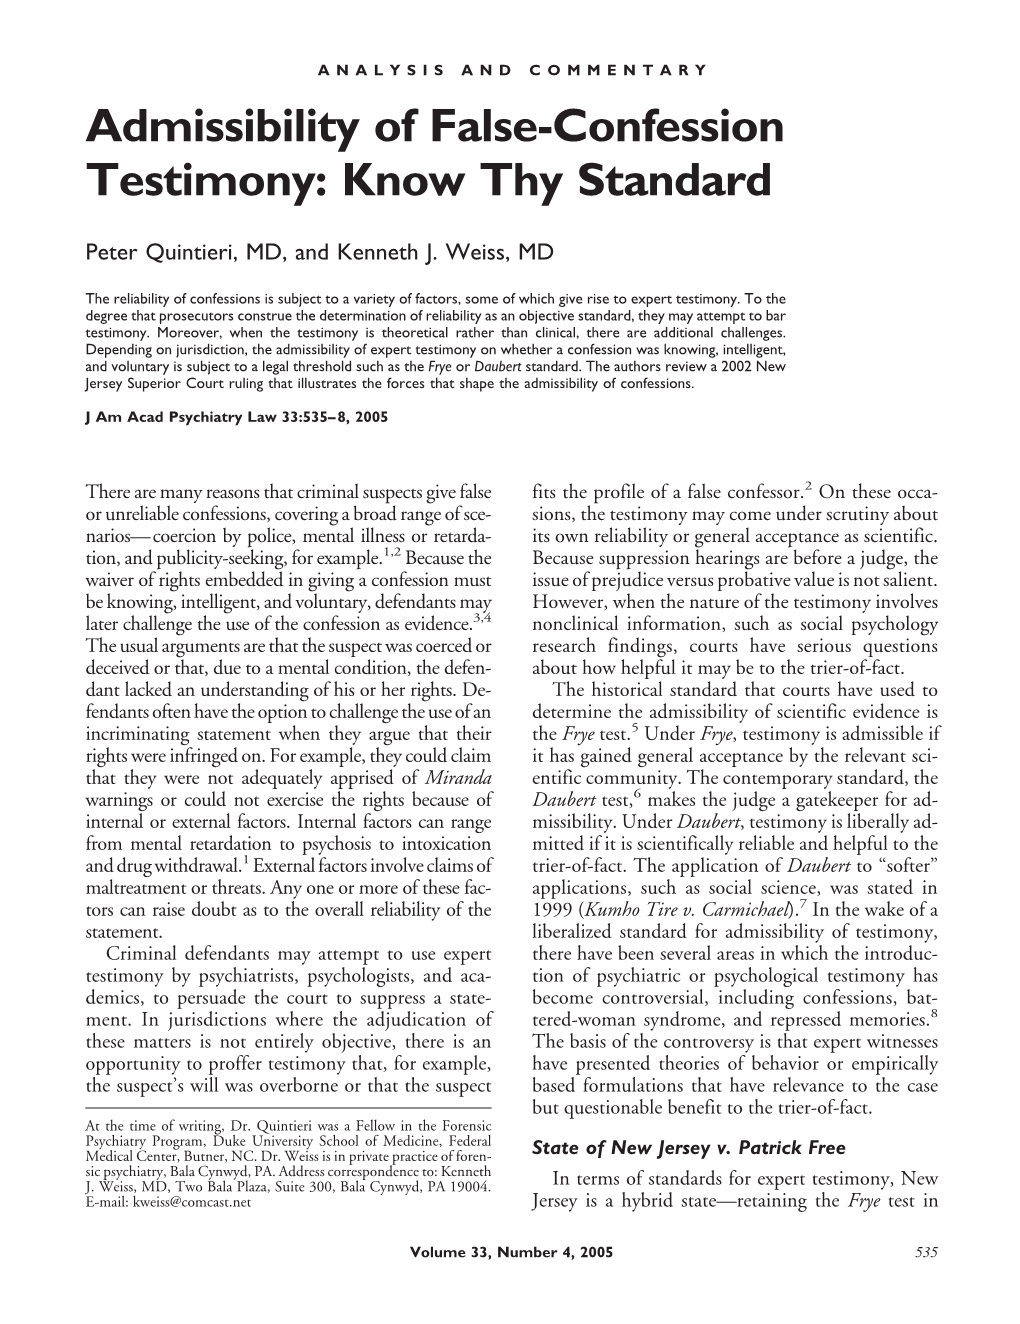 Admissibility of False-Confession Testimony: Know Thy Standard